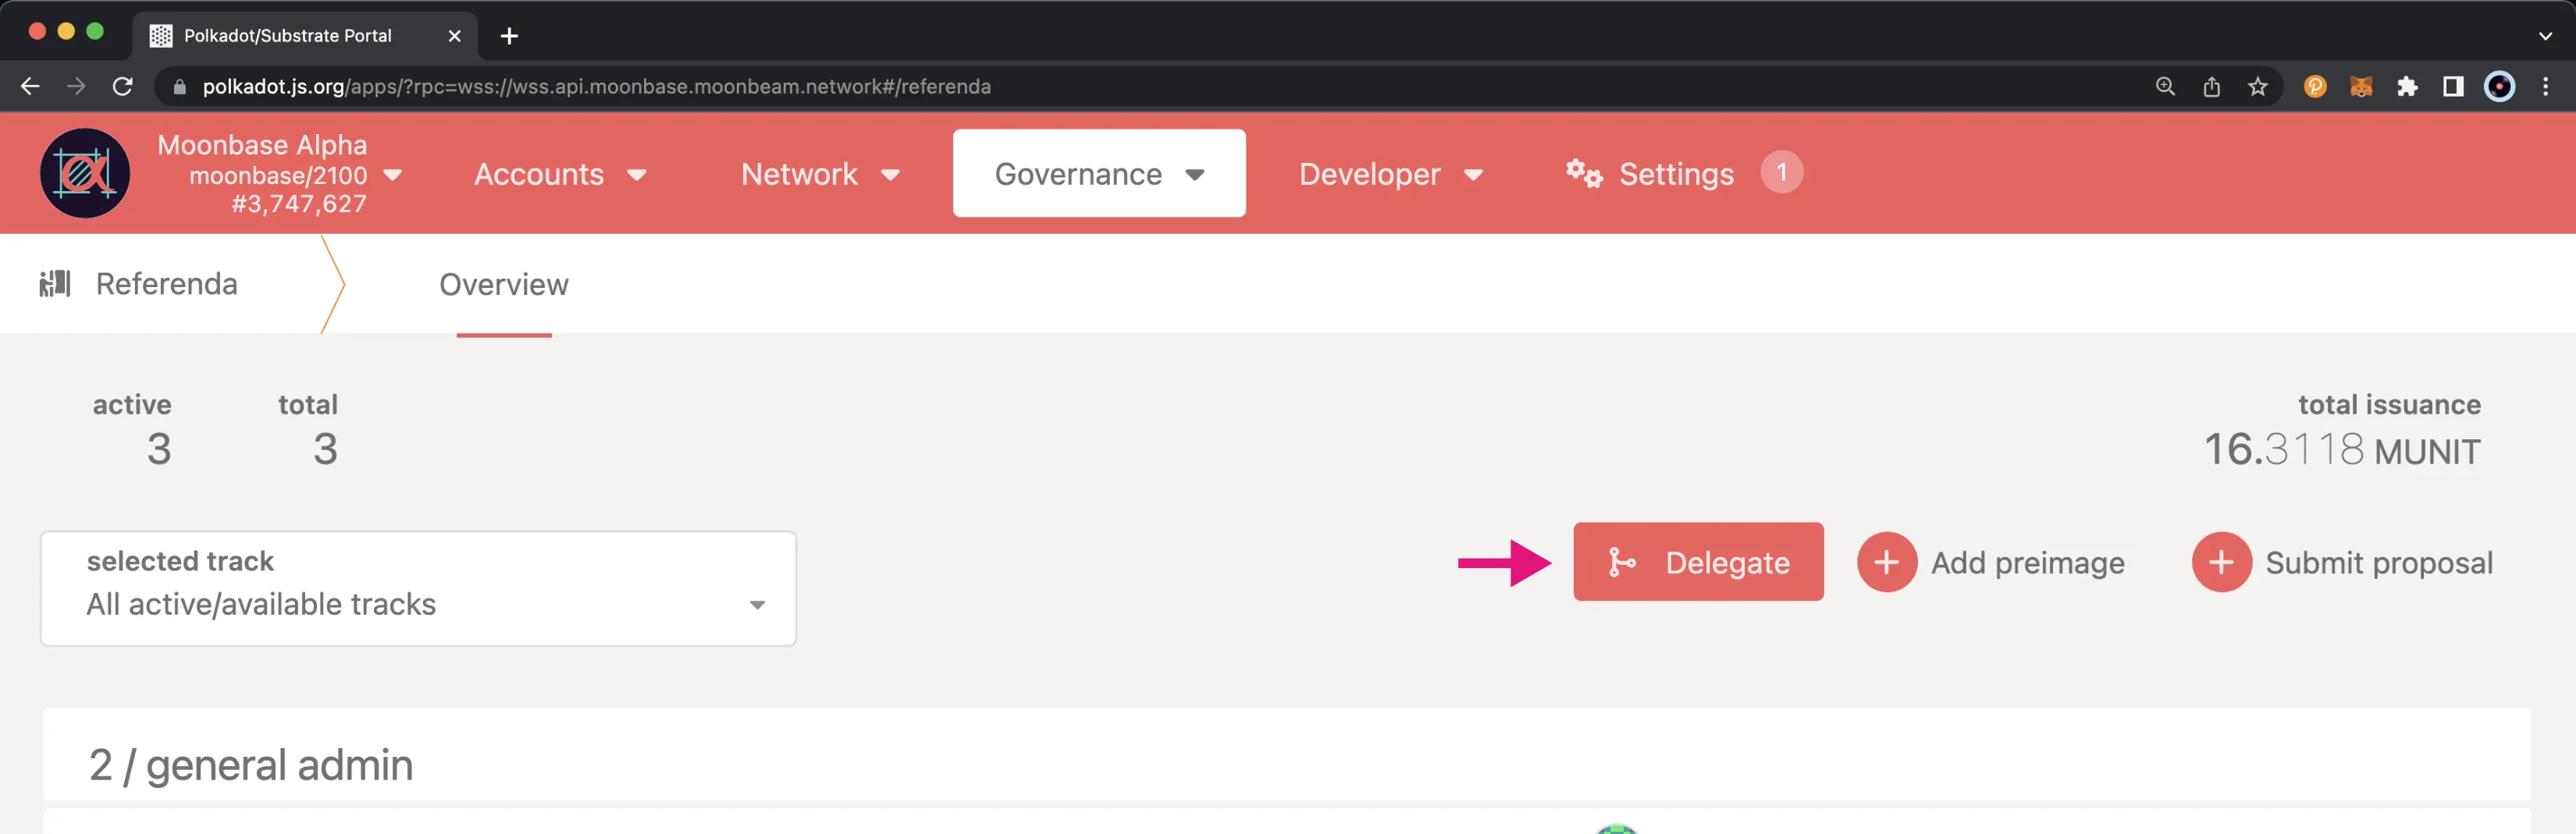 To submit a delegate vote on a referendum, click on the "Delegate" button on Polkadot.js Apps.